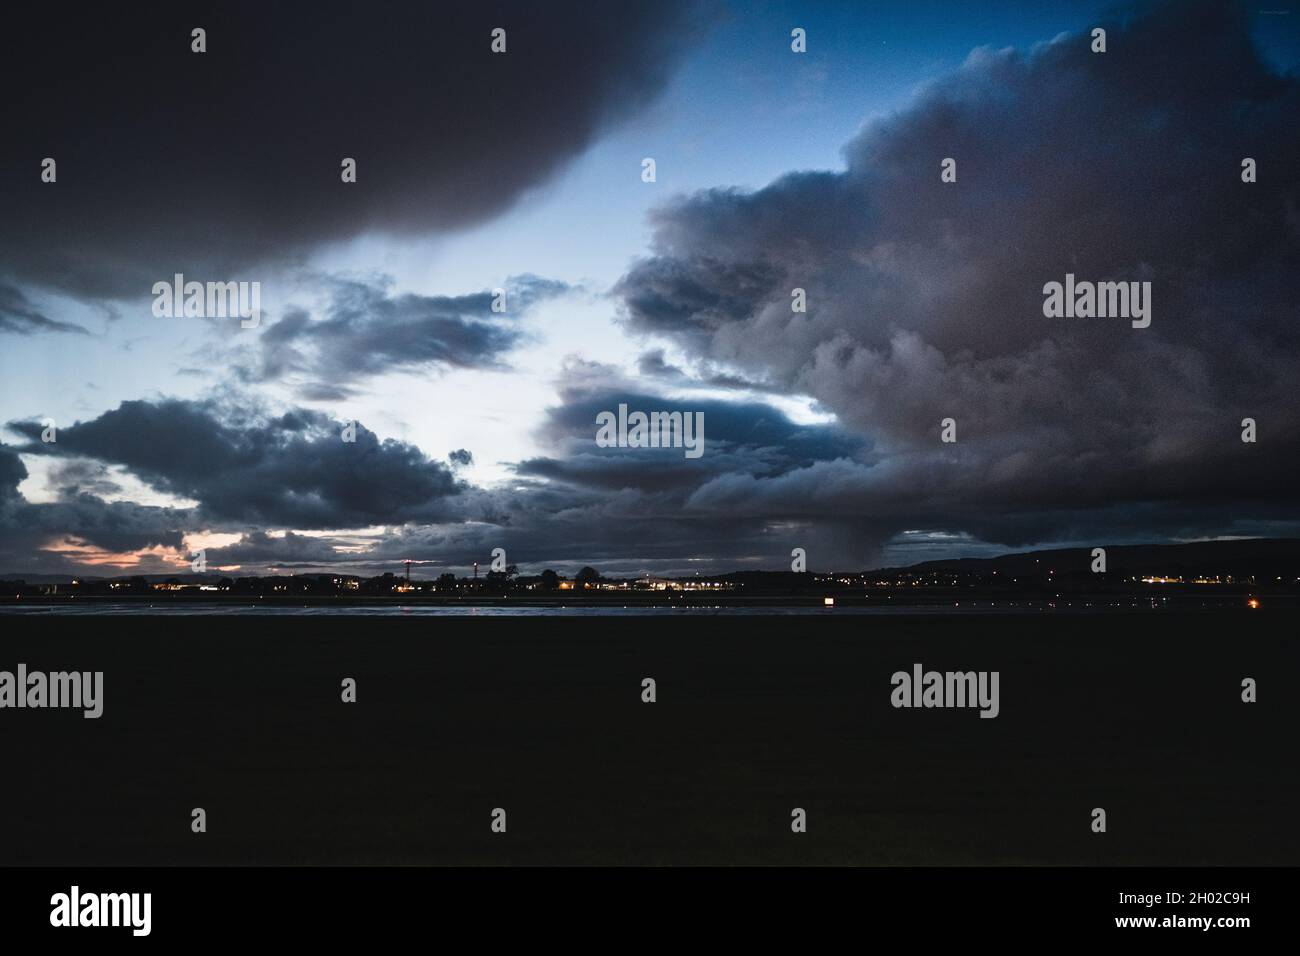 glasgow airport stormy clouds Stock Photo